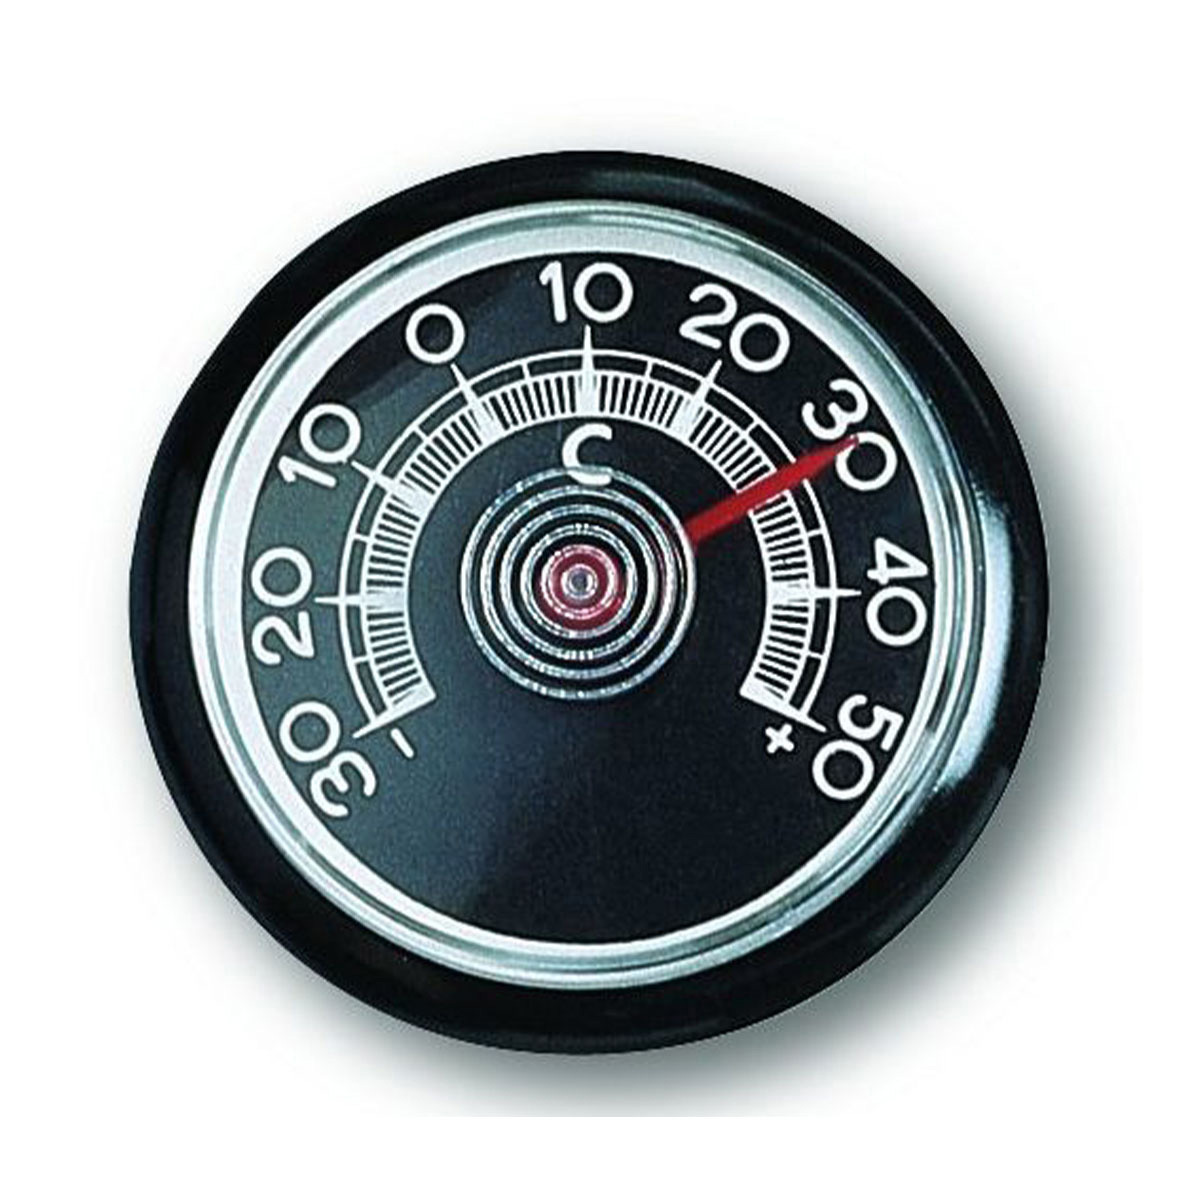 Analogue thermometer